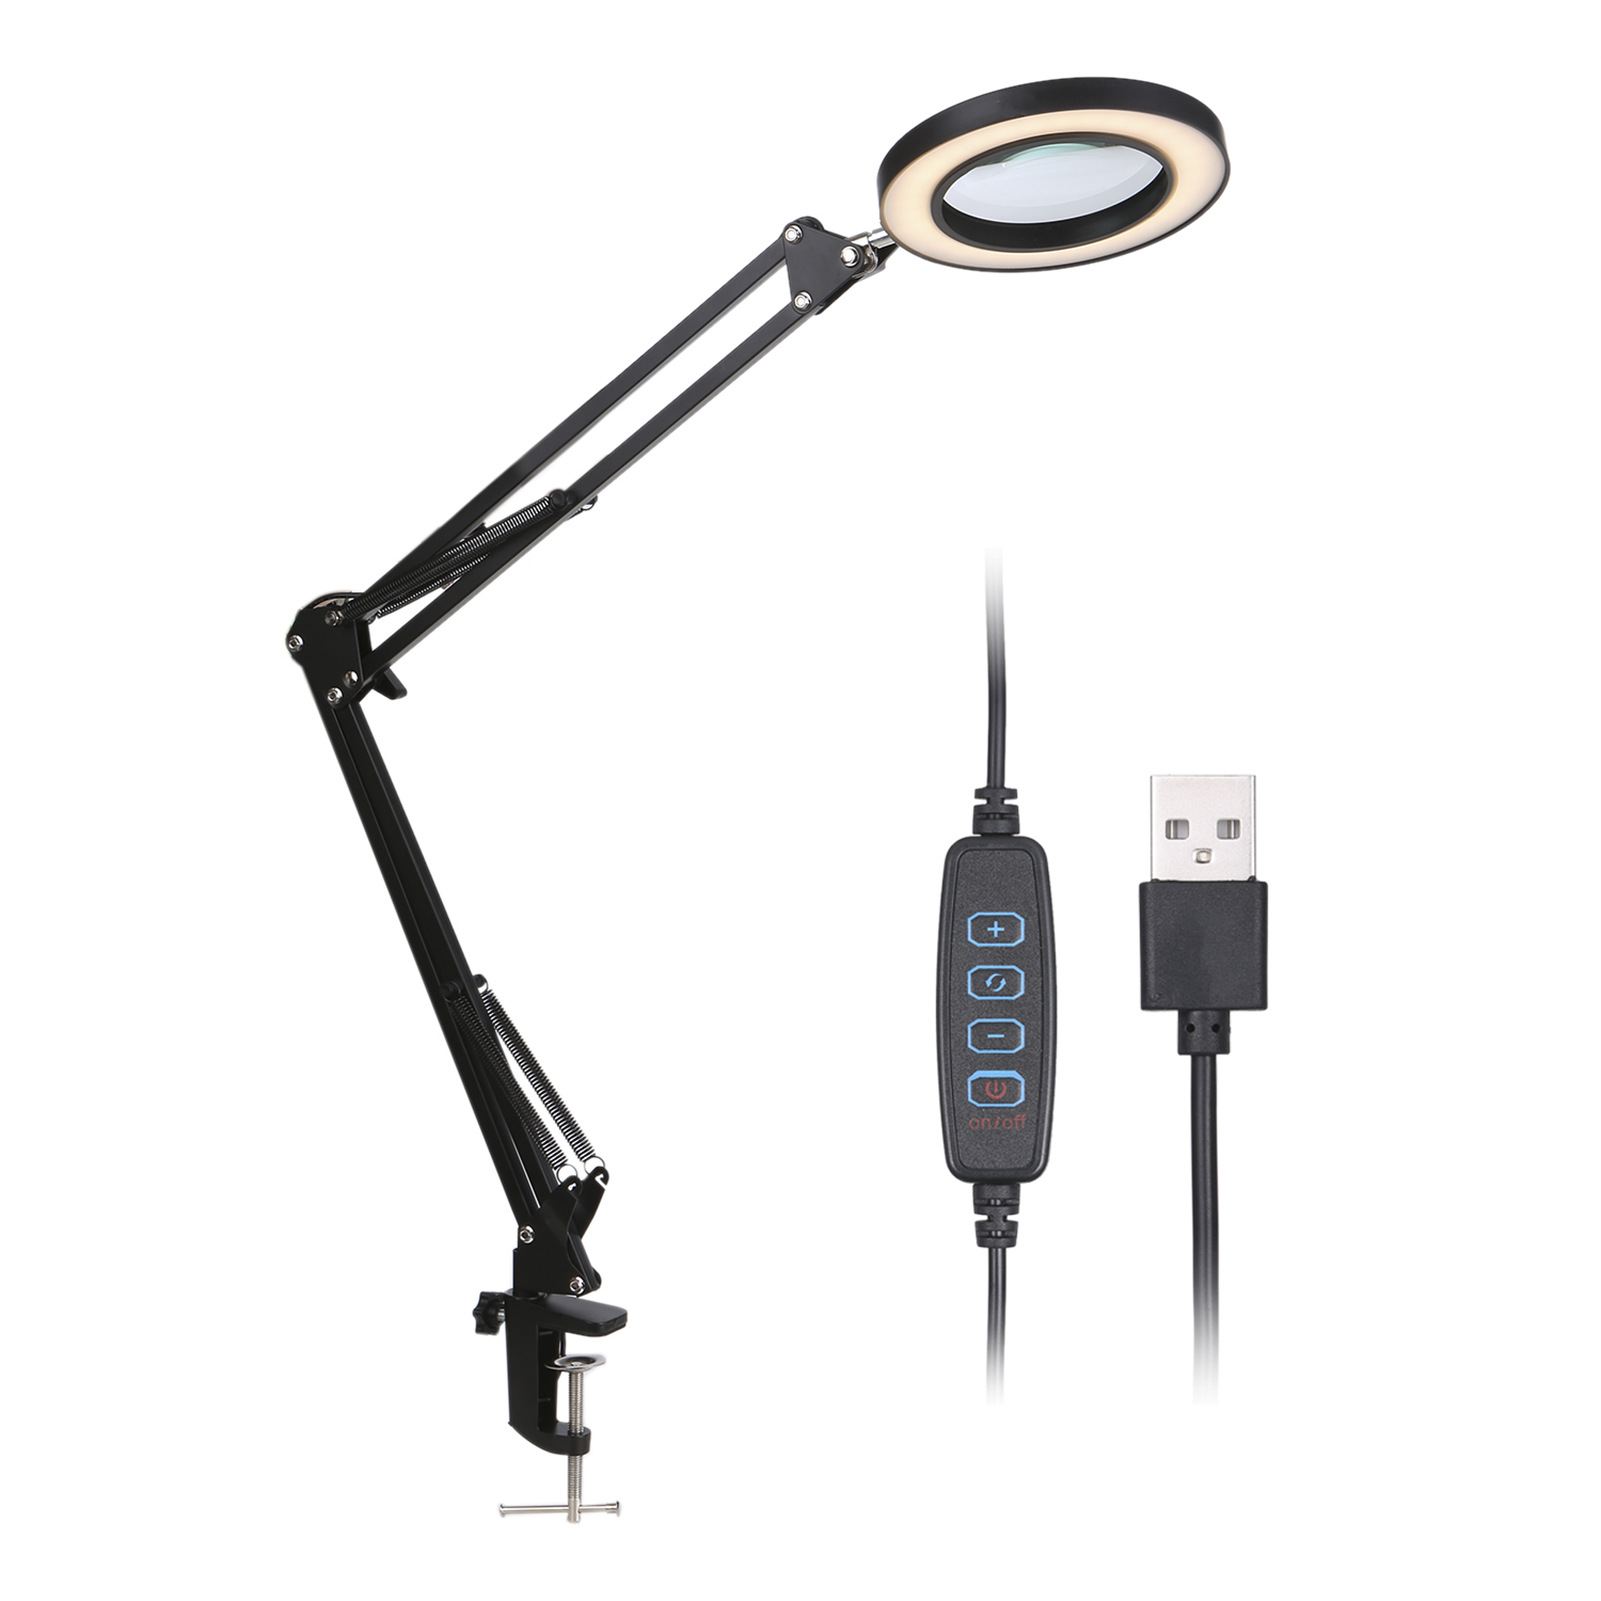 Clip Led Beauty Magnifying Desk Lamp with Glass Facial Table Light Magnifier Metal Swing Arm Reading Lamps Portable Desktop Loupes Work Clamp Magnify Lighting for Skin Examination